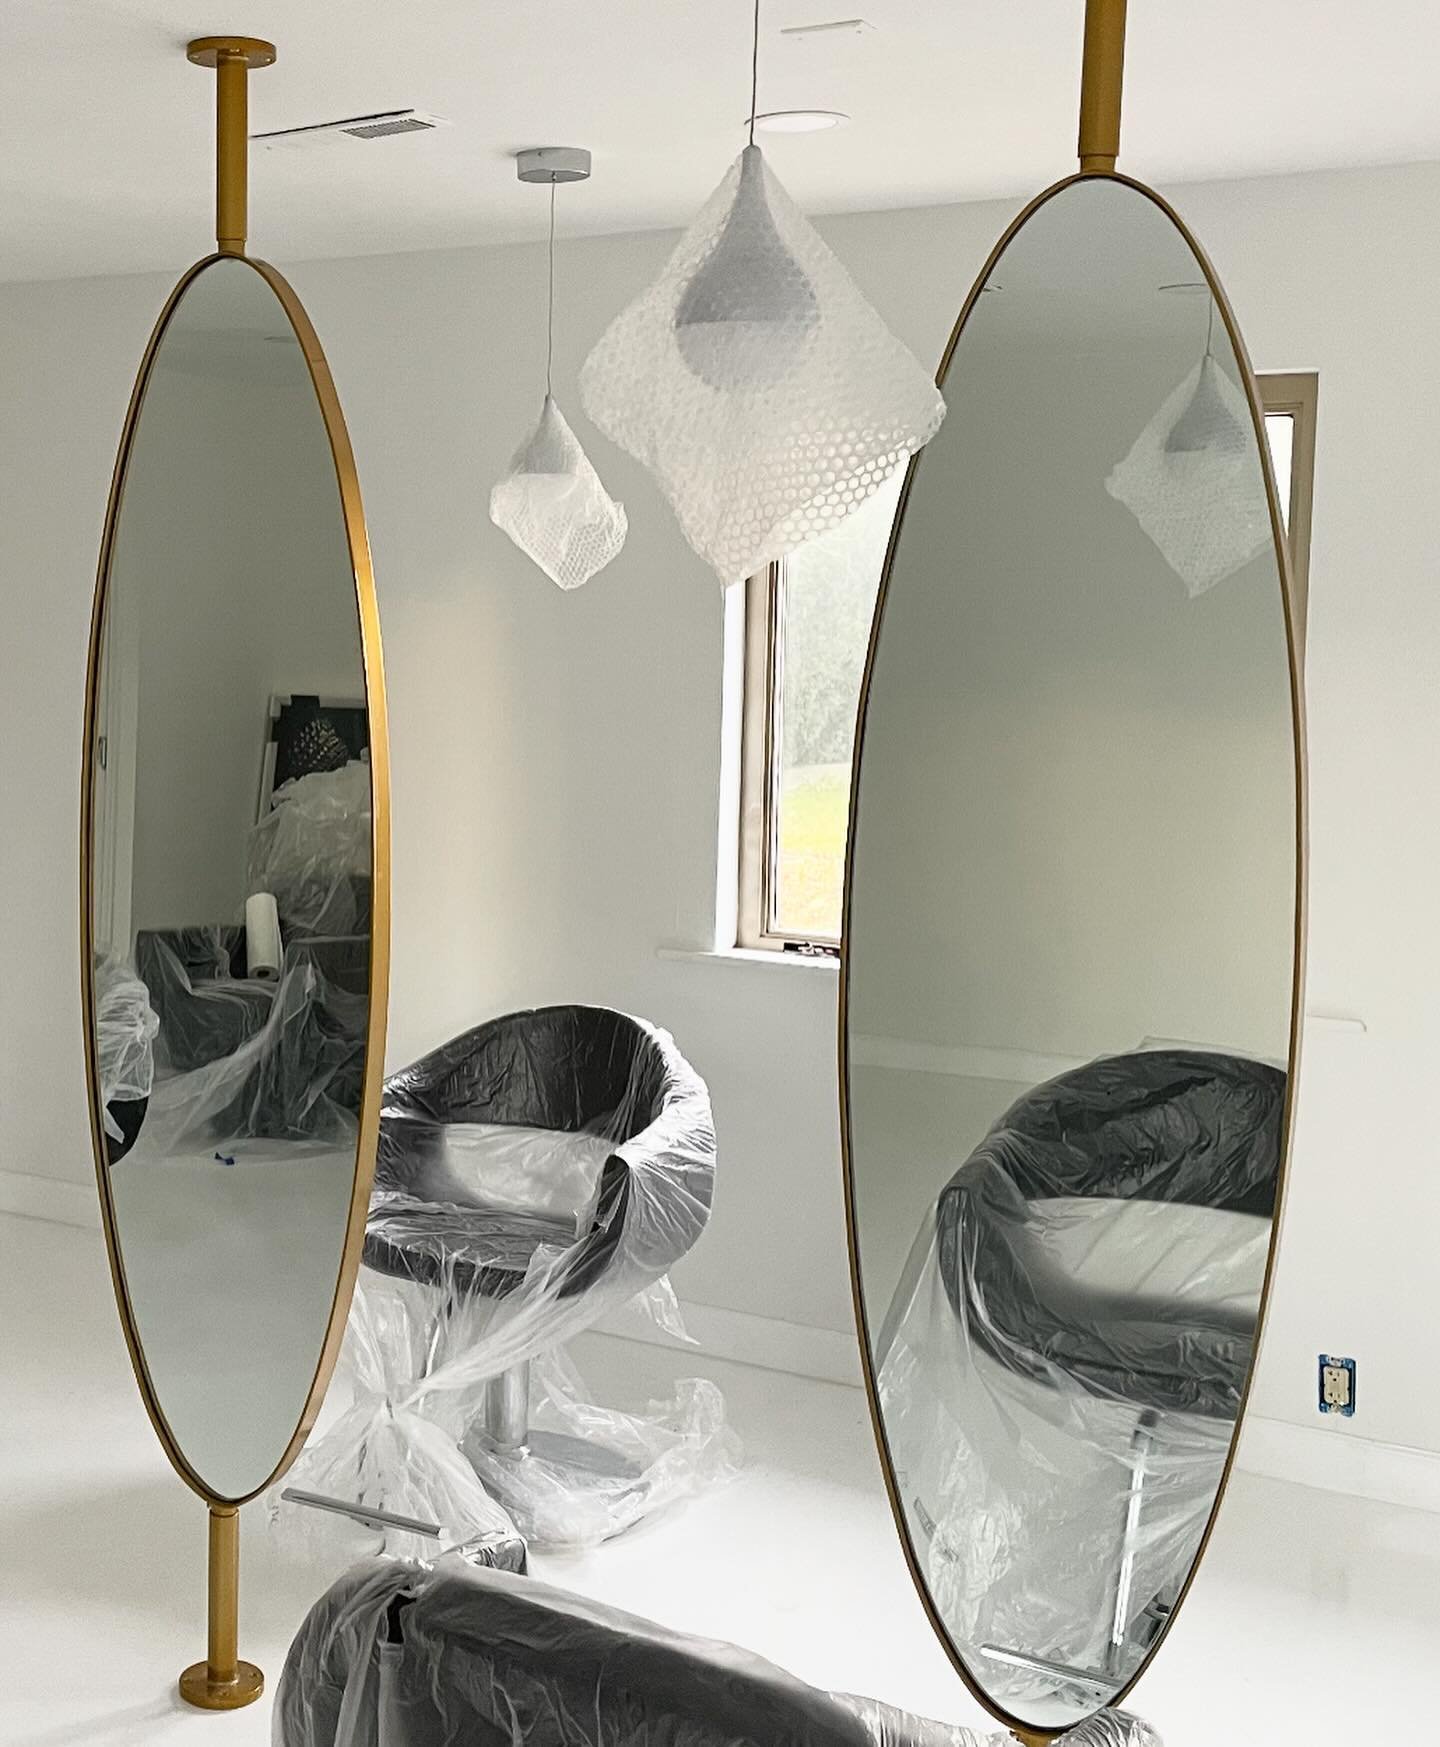 Many moons ago I made these oval salon mirrors. The design (not mine) was for brass, but not in the budget unfortunately so we went with powdercoated steel.  They pivot 360 degrees but I always question if those extra functions are ever actually used